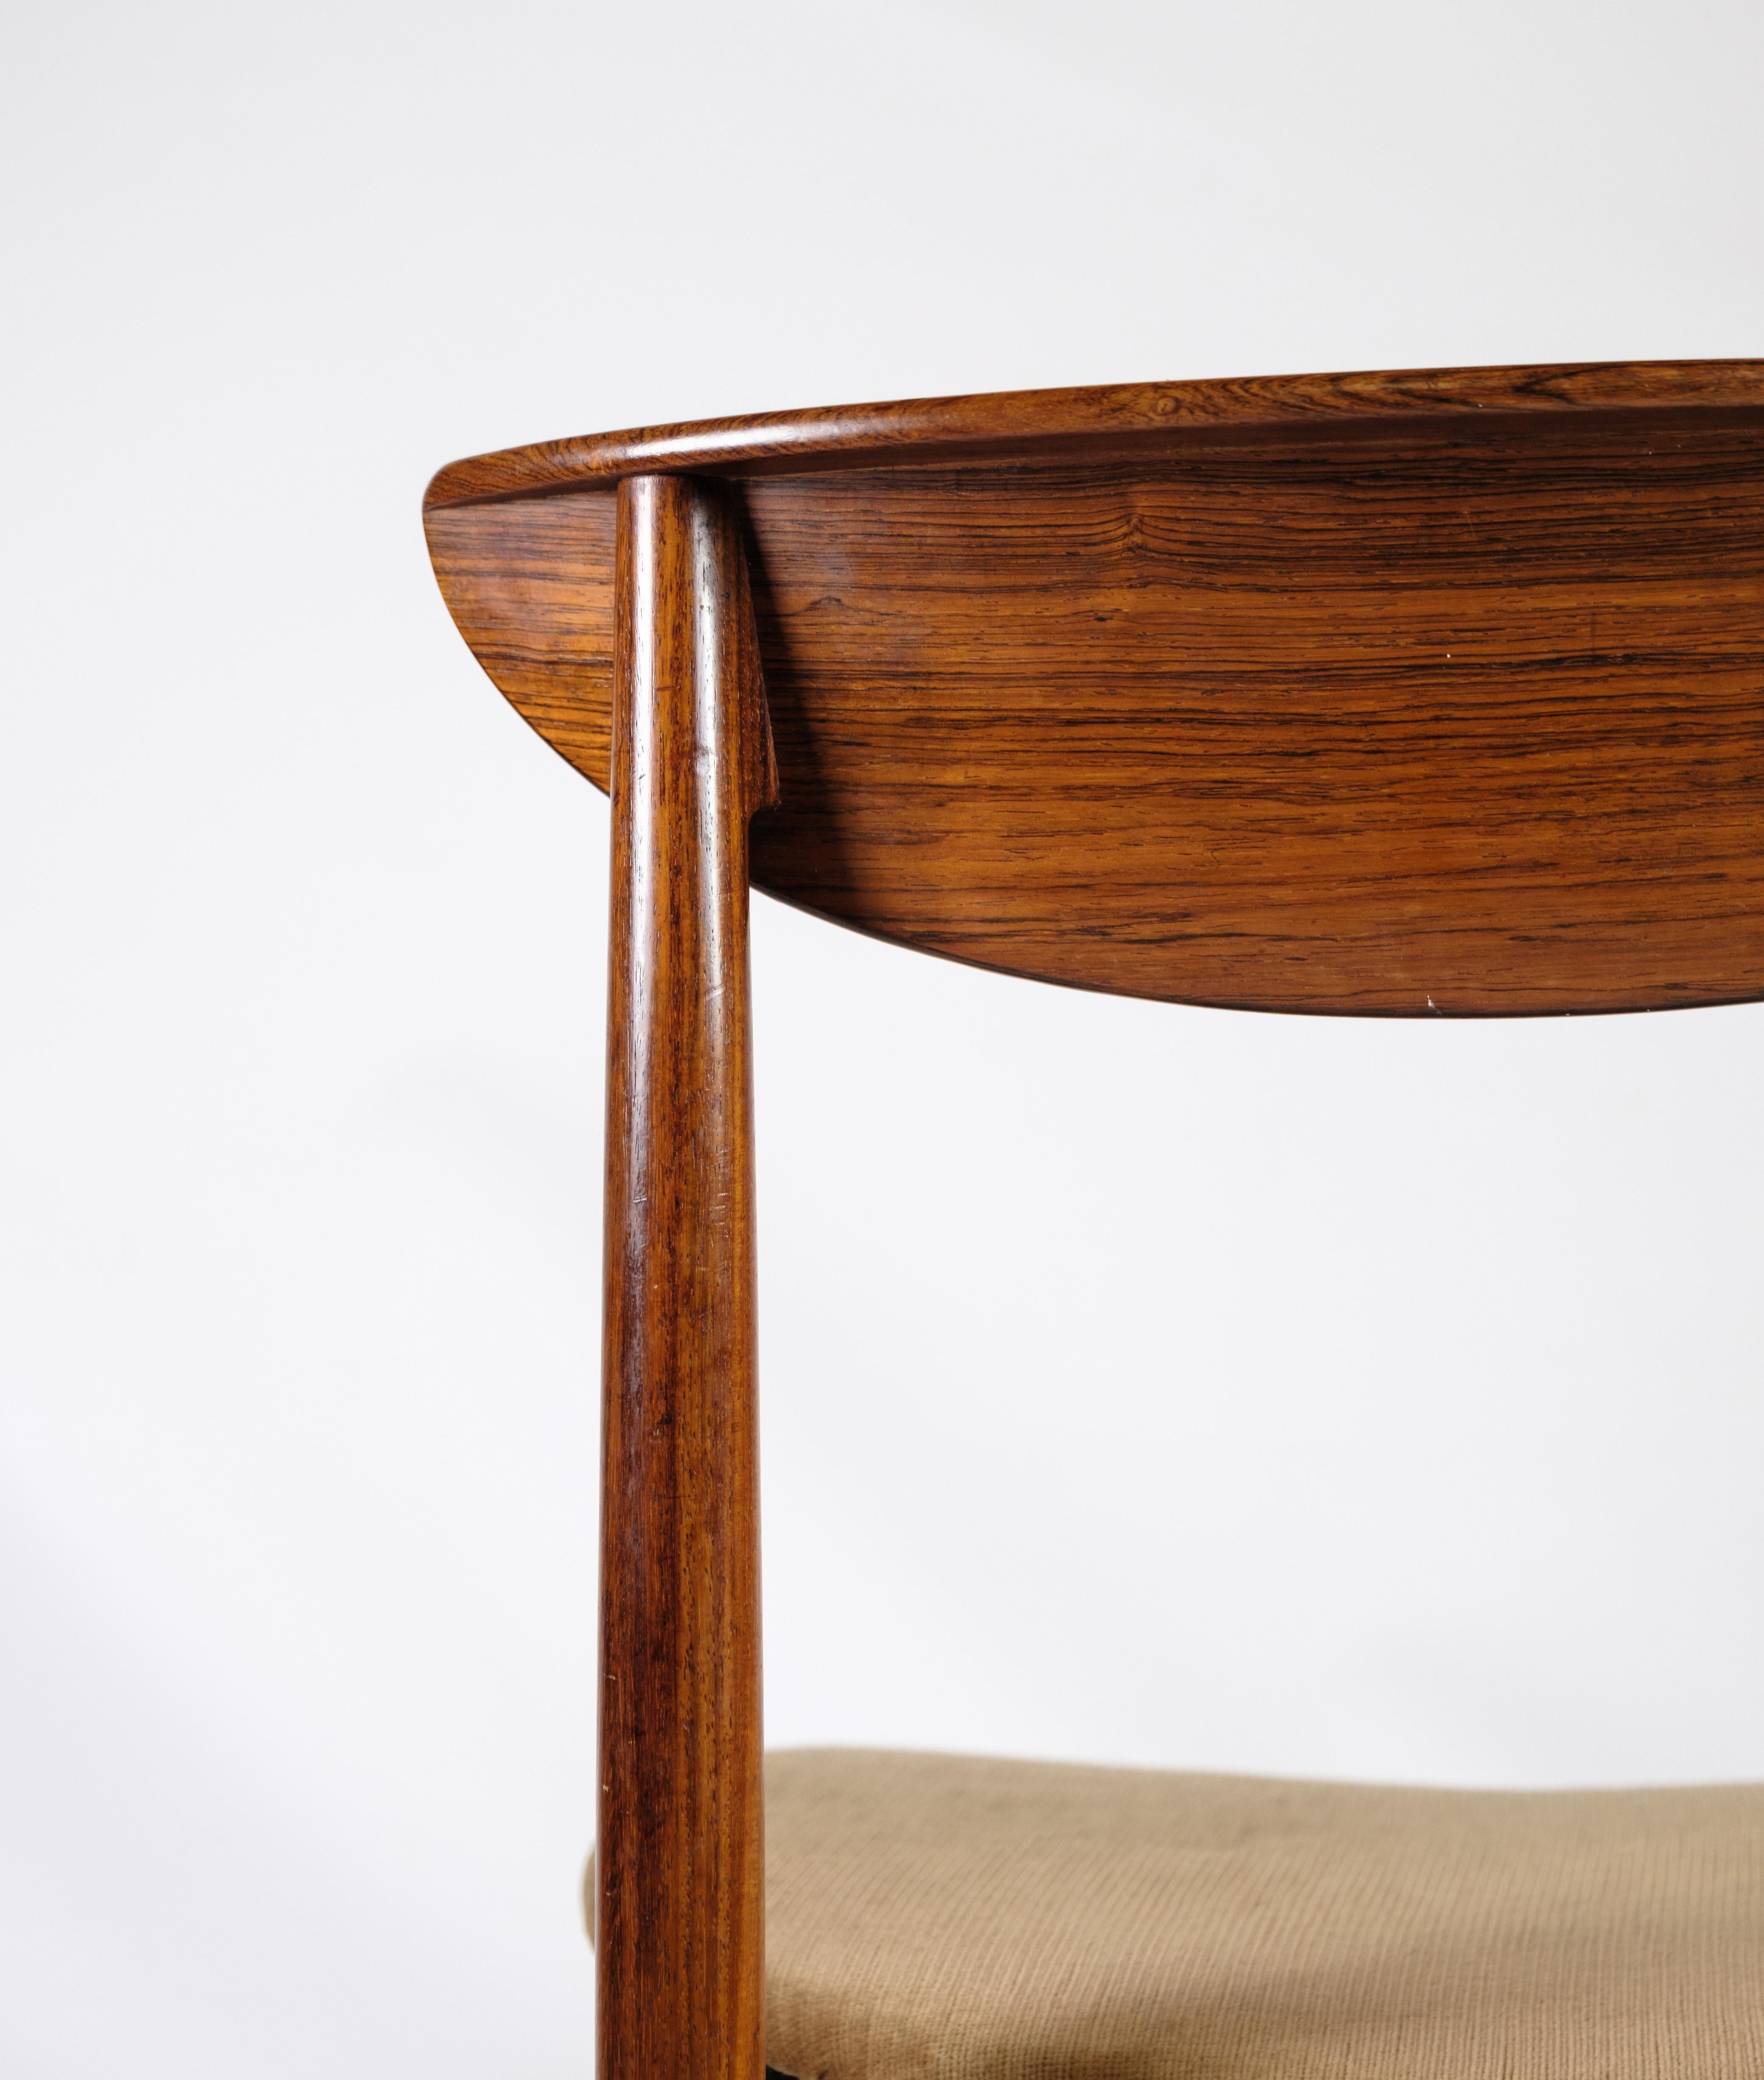 Set of 2 Chairs Made In Rosewood By Peter Hvidt From 1960s For Sale 7